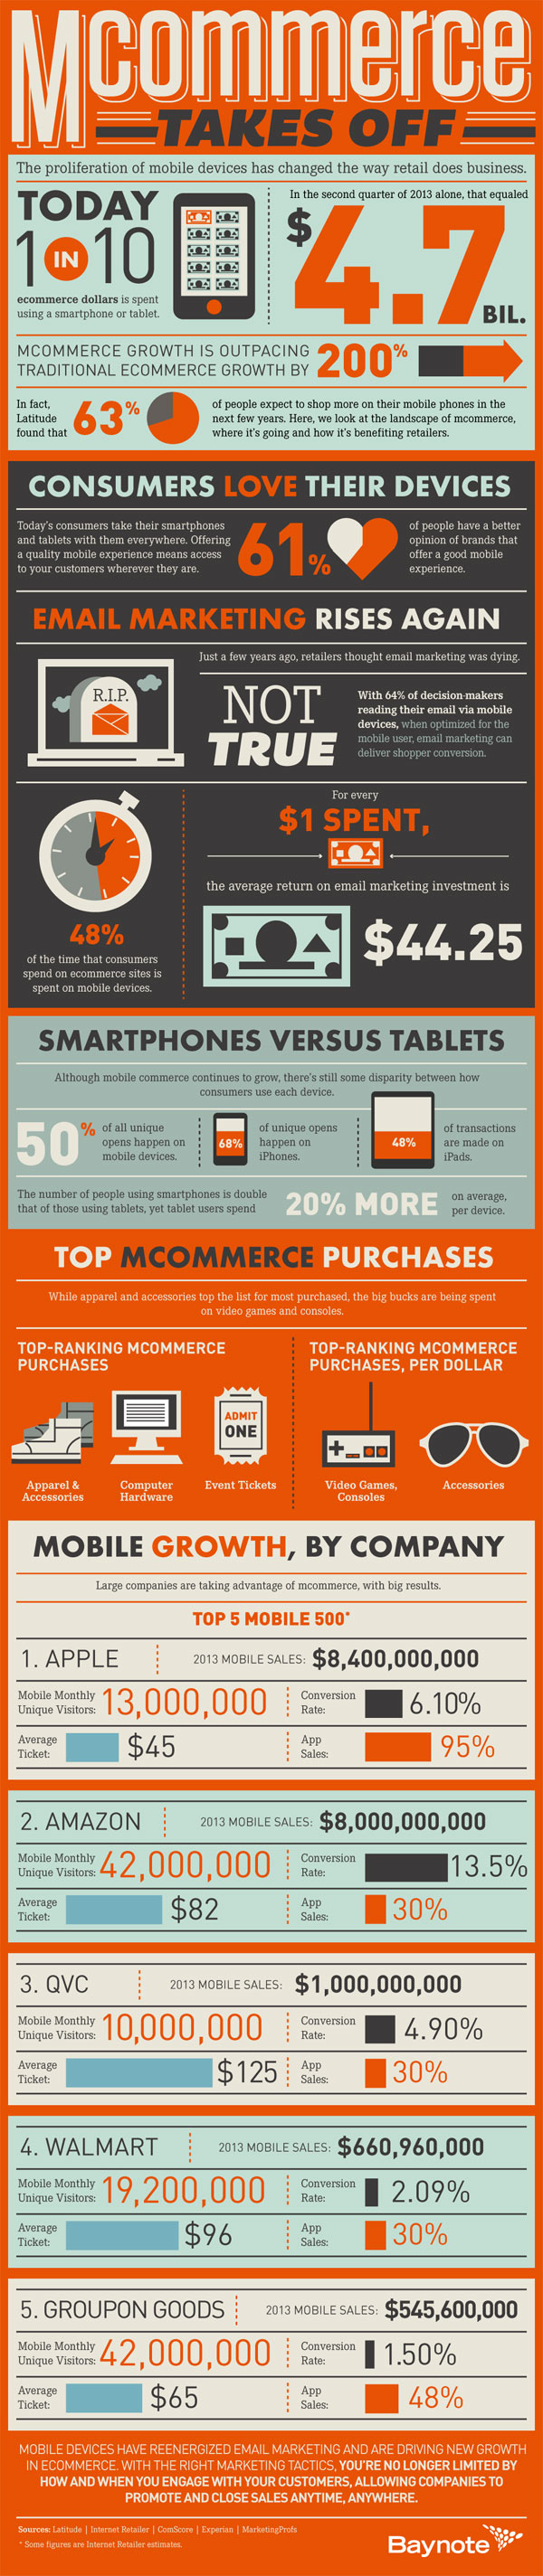 mobile-commerce-infographic1